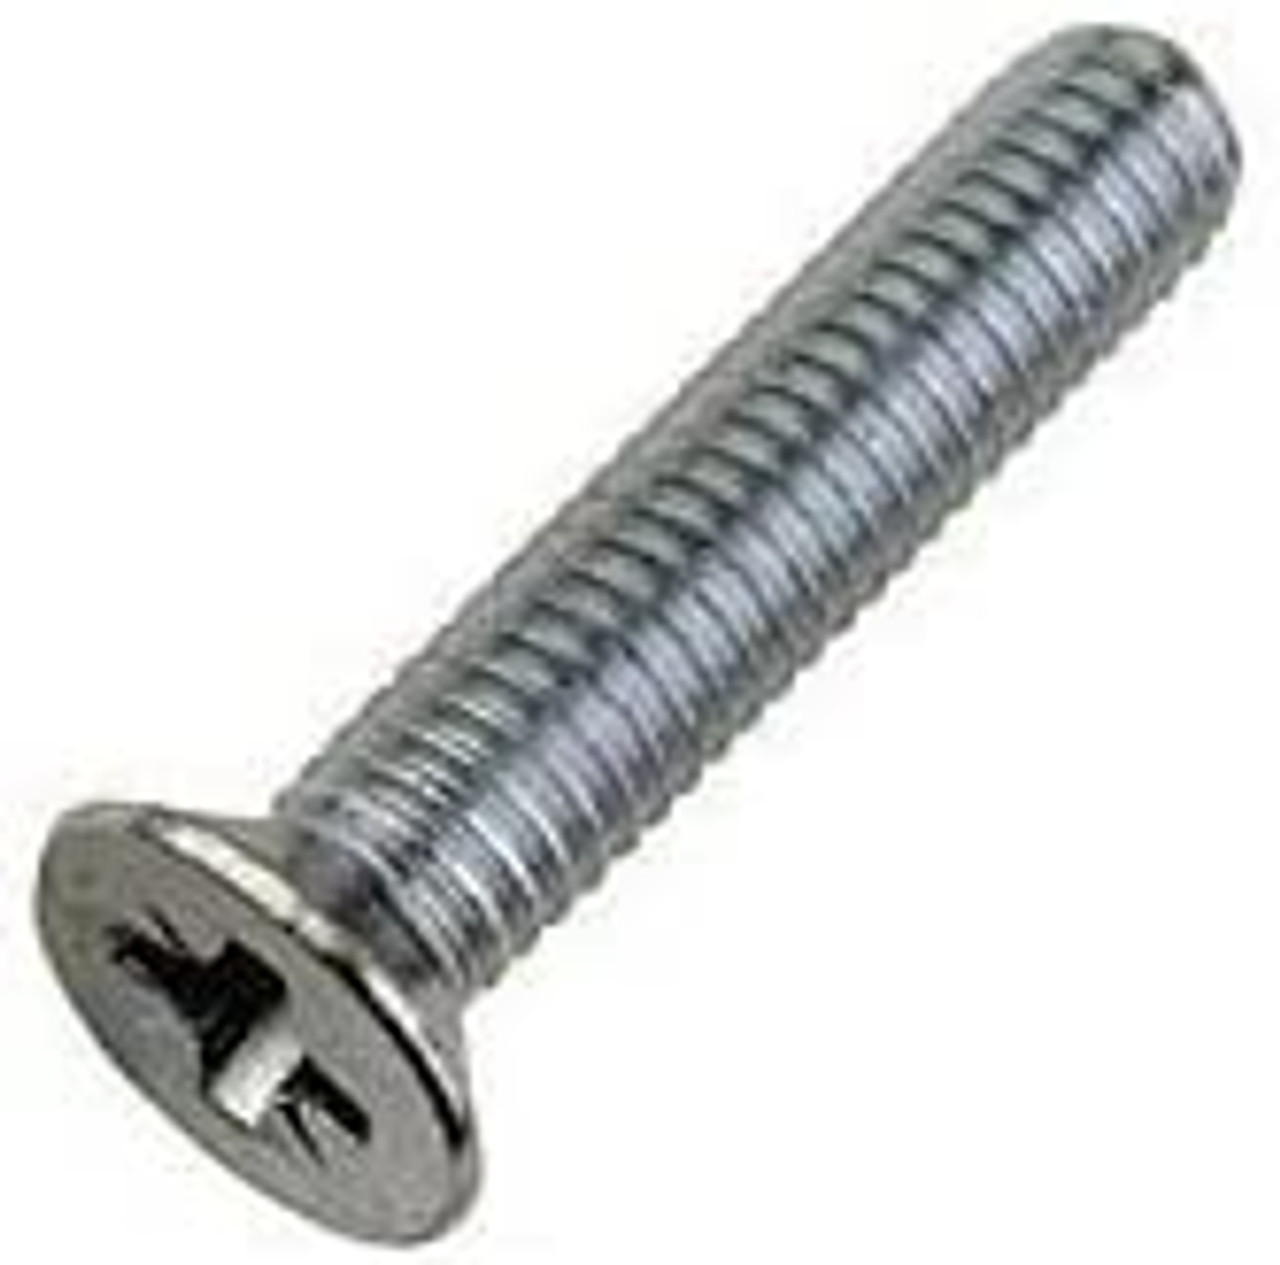 6mm Countersunk Machine Screws/Bolts M6 x 25mm (Including Head) A2 Stainless Steel Pozi Csk Head Mch Screw (10 Pack) Free UK Delivery